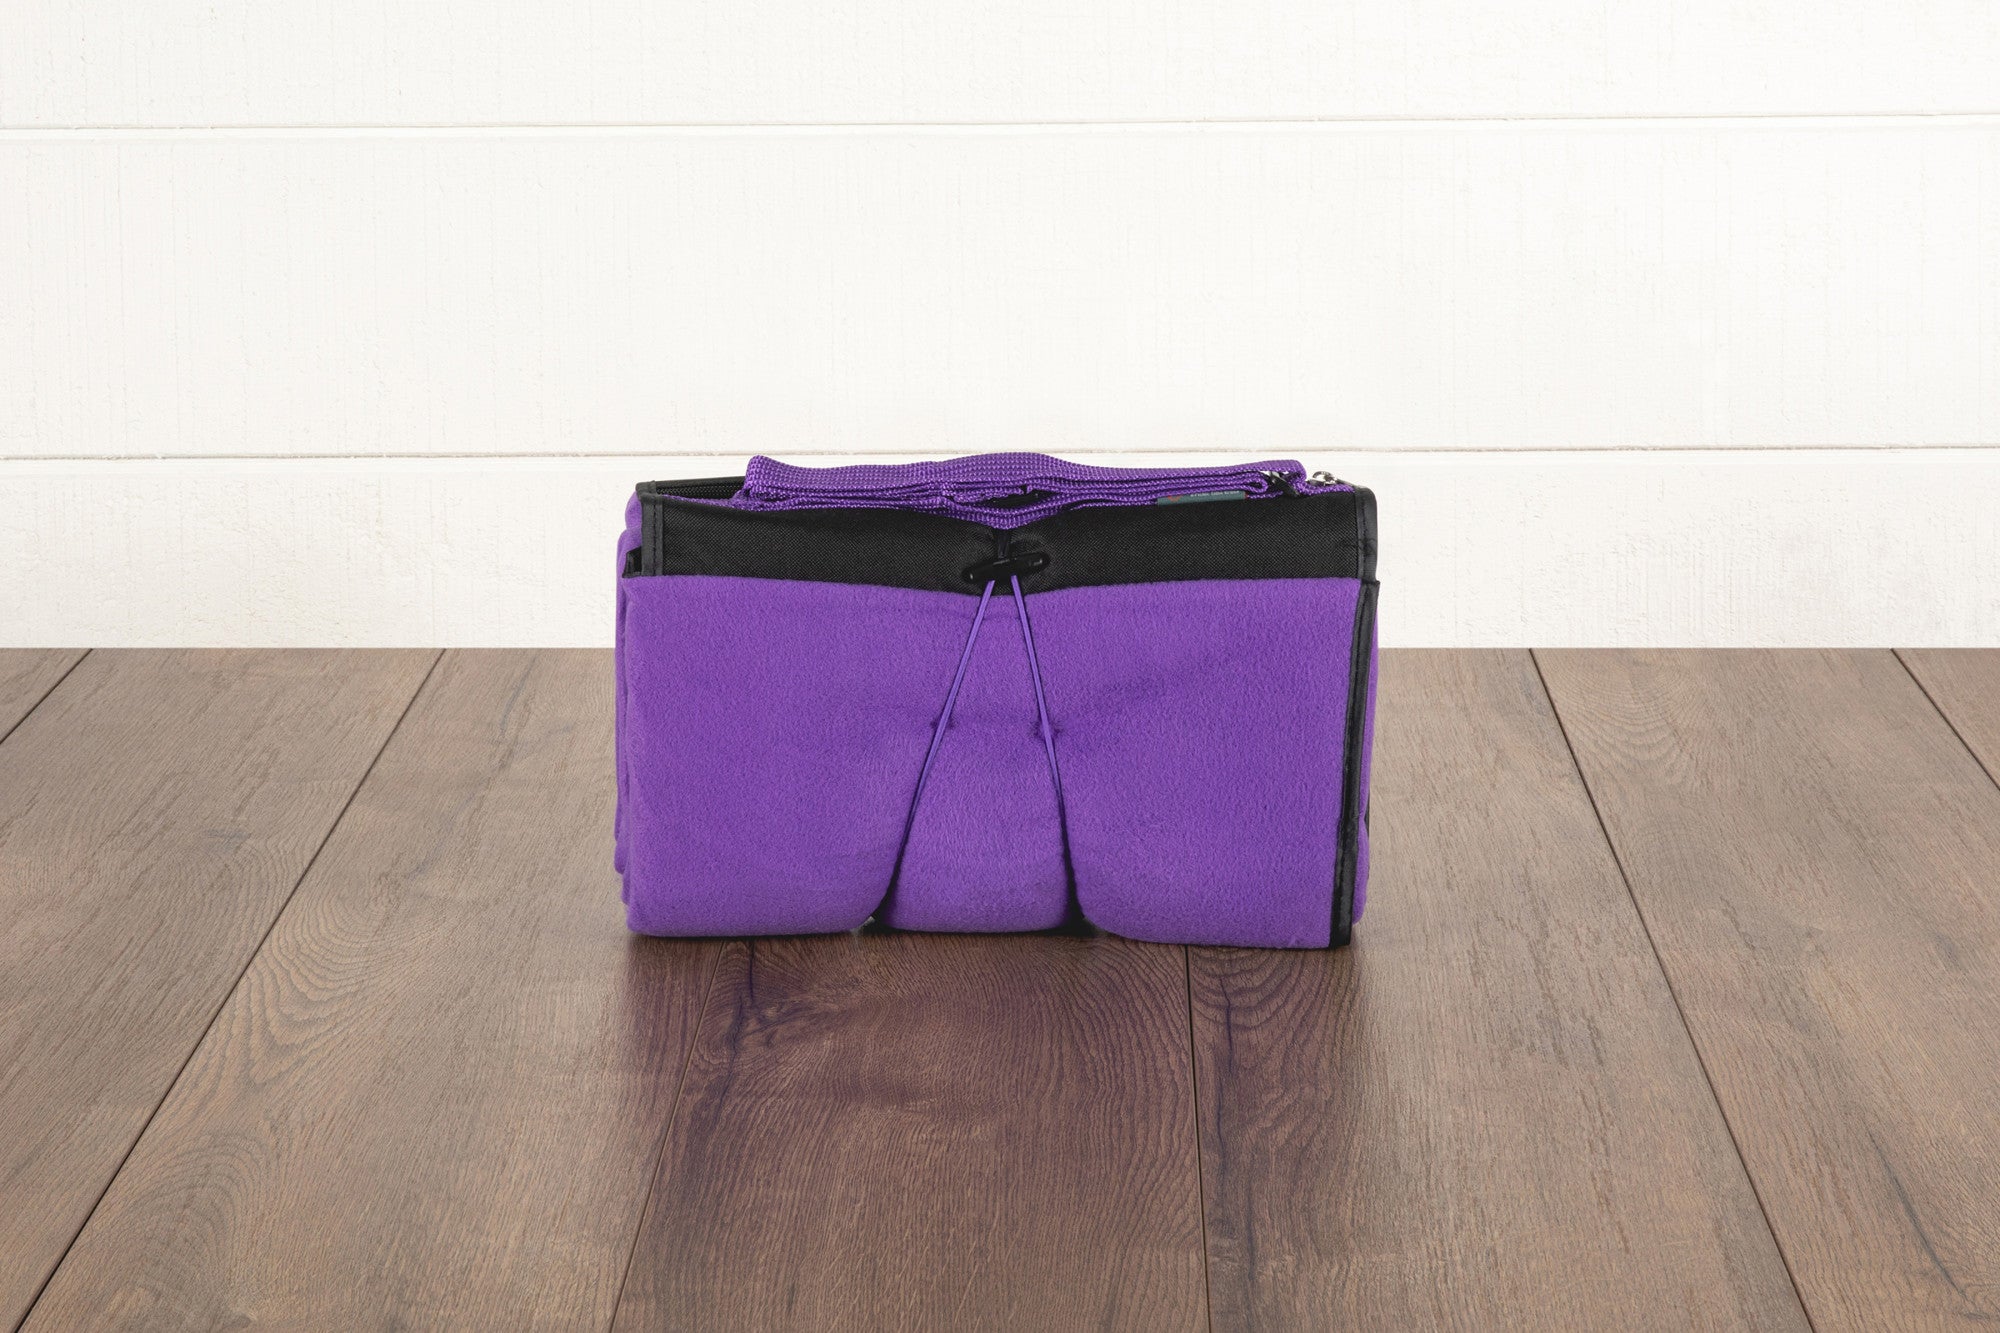 Baltimore Ravens - Mickey Mouse - Blanket Tote Outdoor Picnic Blanket